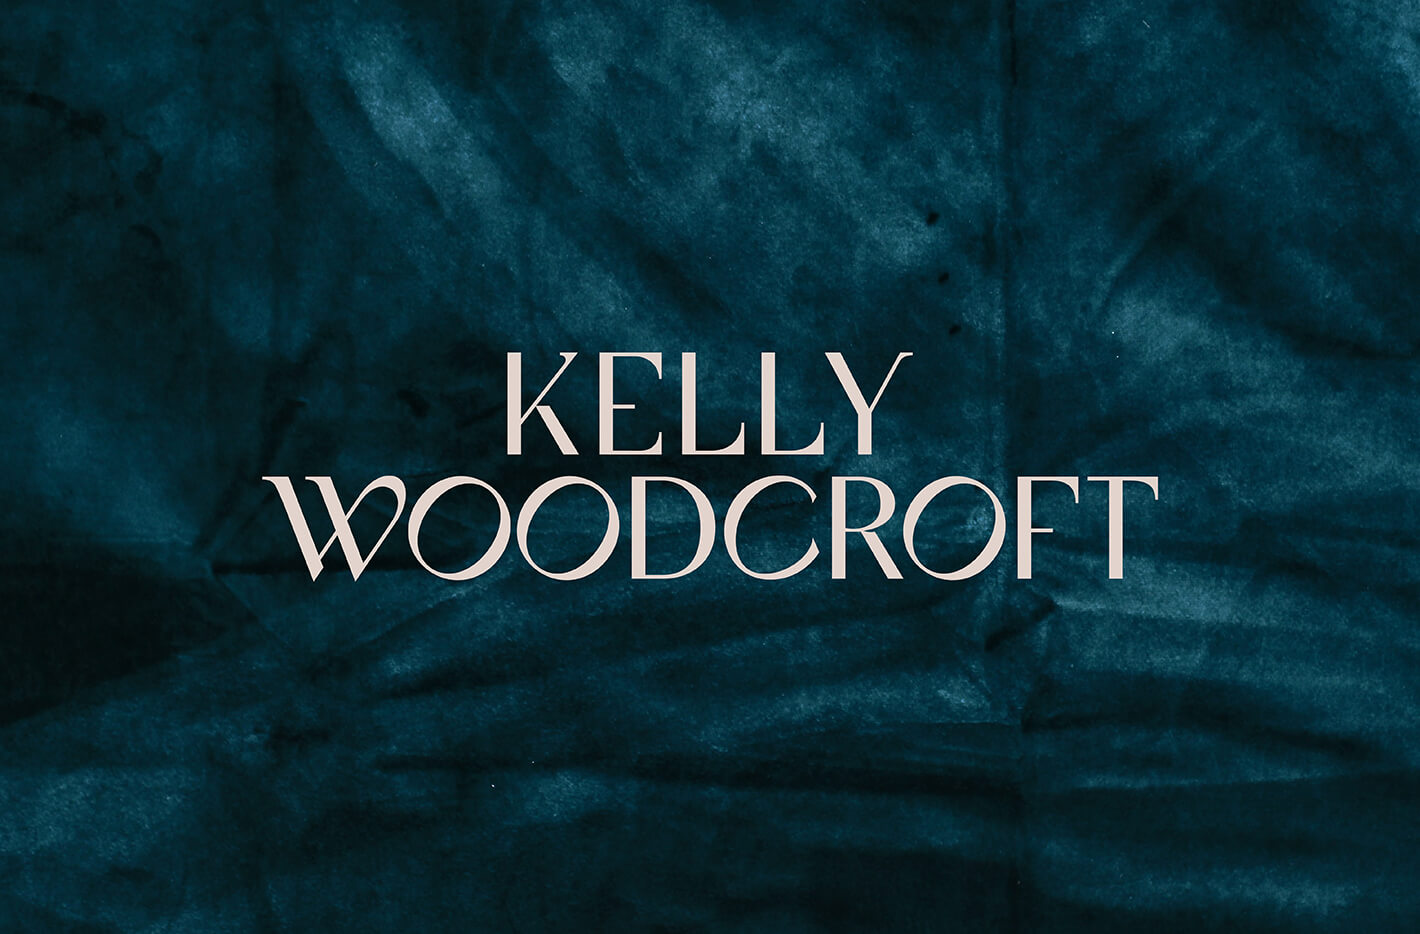 The custom jewellery designer logo for Kelly Woodcroft is in white on a shadowy teal velvet background